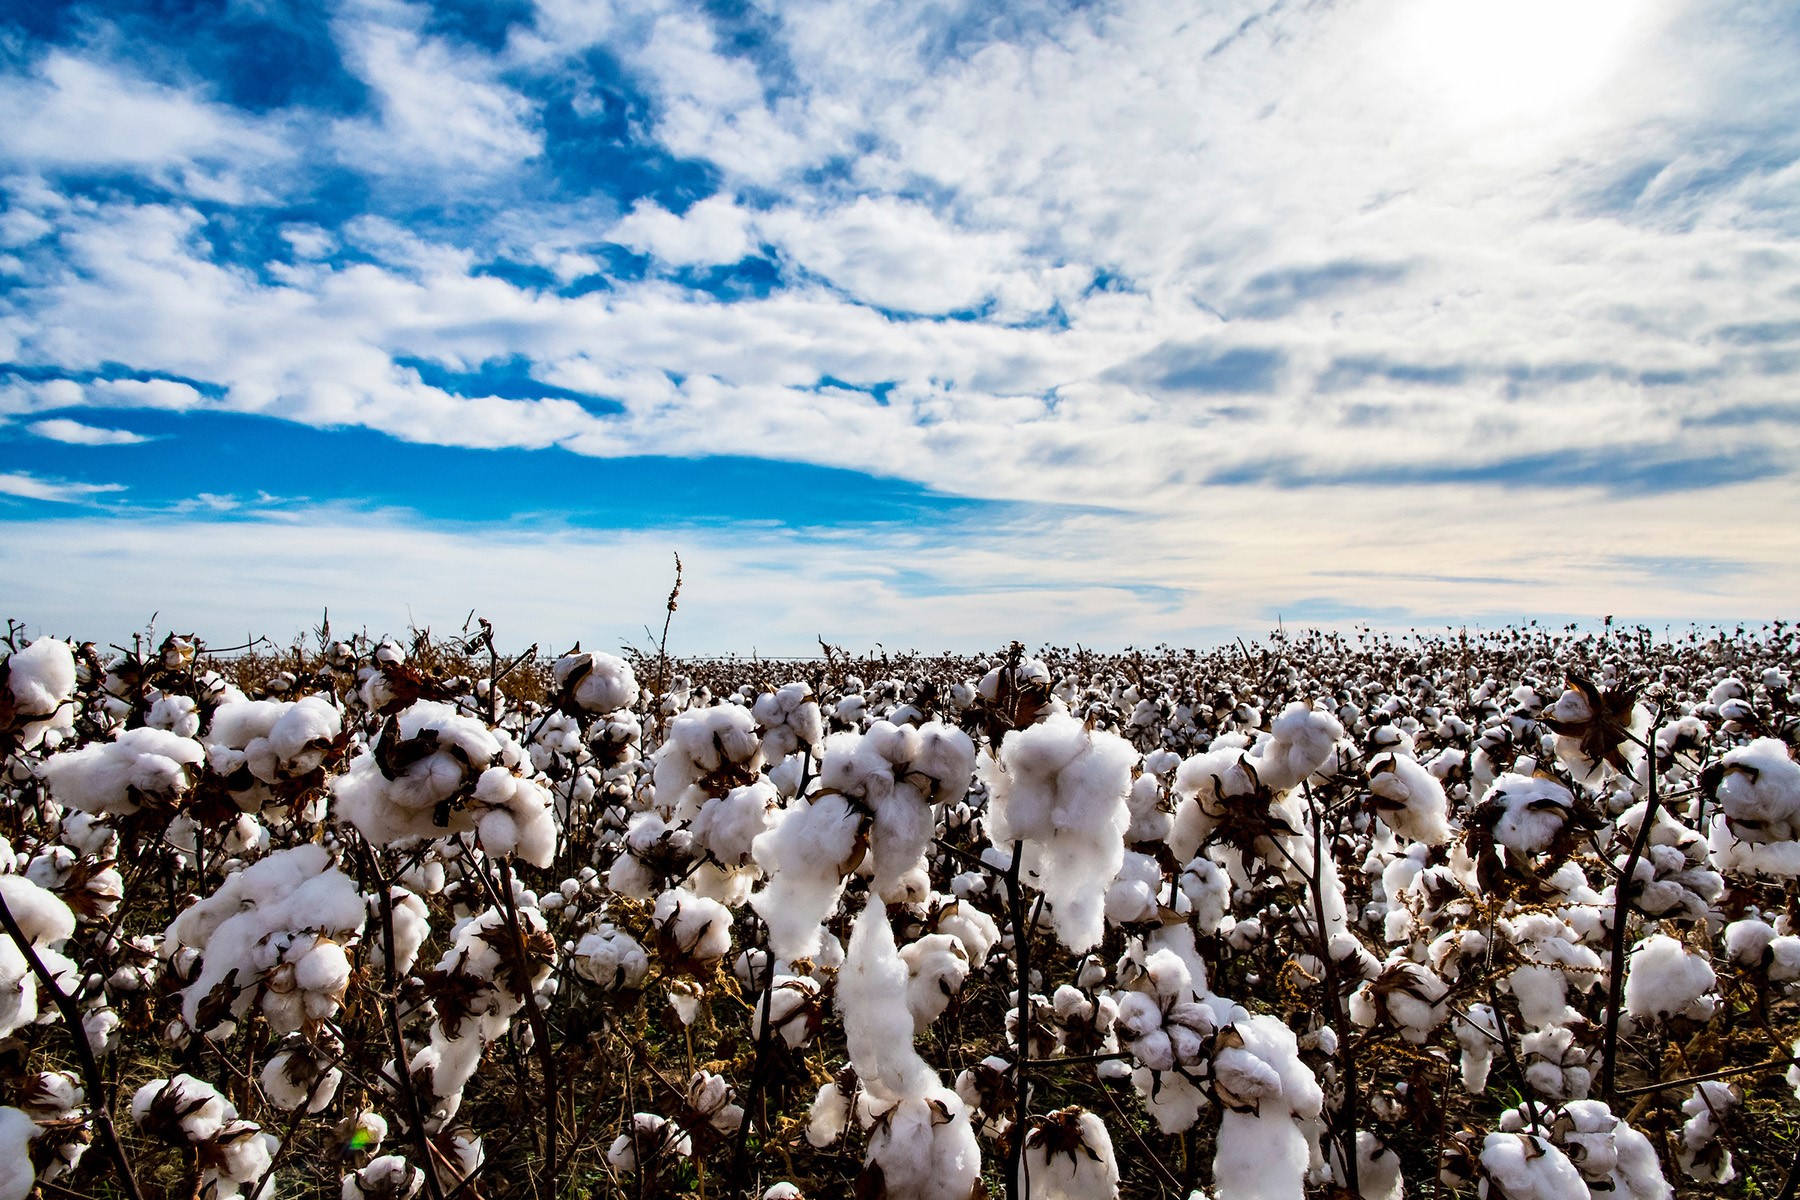 U.S. Cotton Trust Protocol is a leader in Sustainability